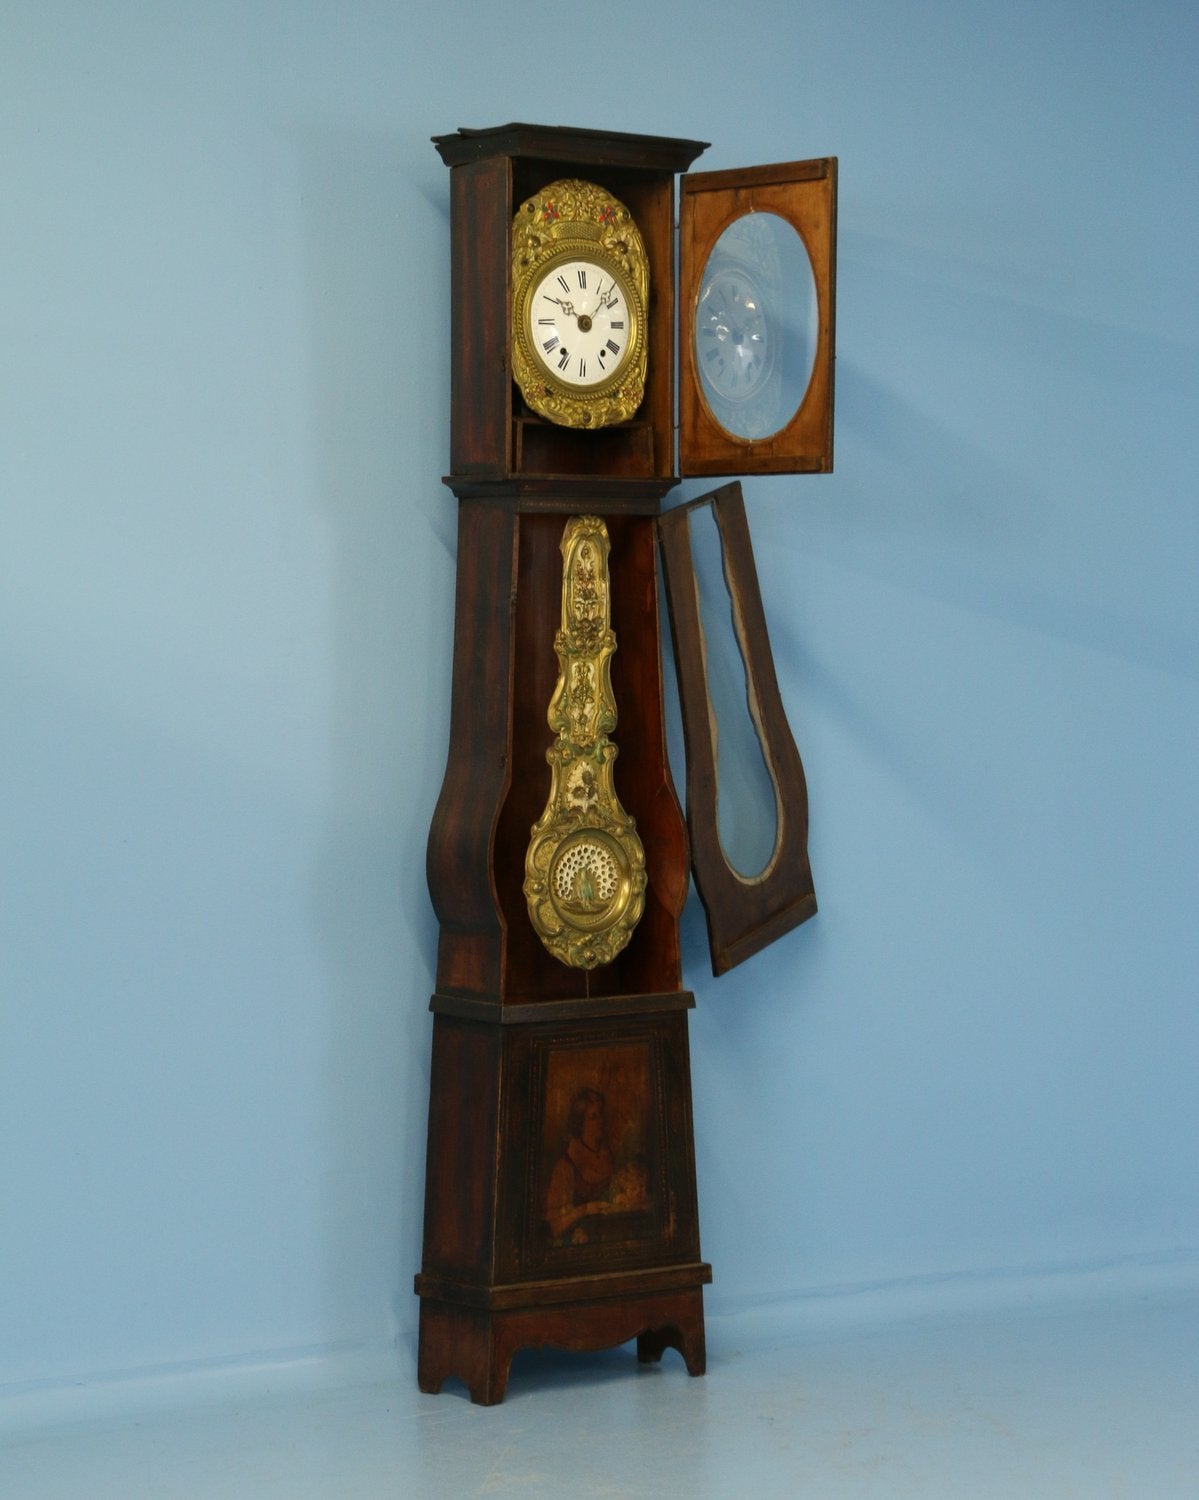 19th century French Provincial Morbier tall case clock with highly decorative pressed brass pendulum including hand-painted peacock and elaborate floral. The long case has simple painted floral and grape decoration throughout. The bottom of the